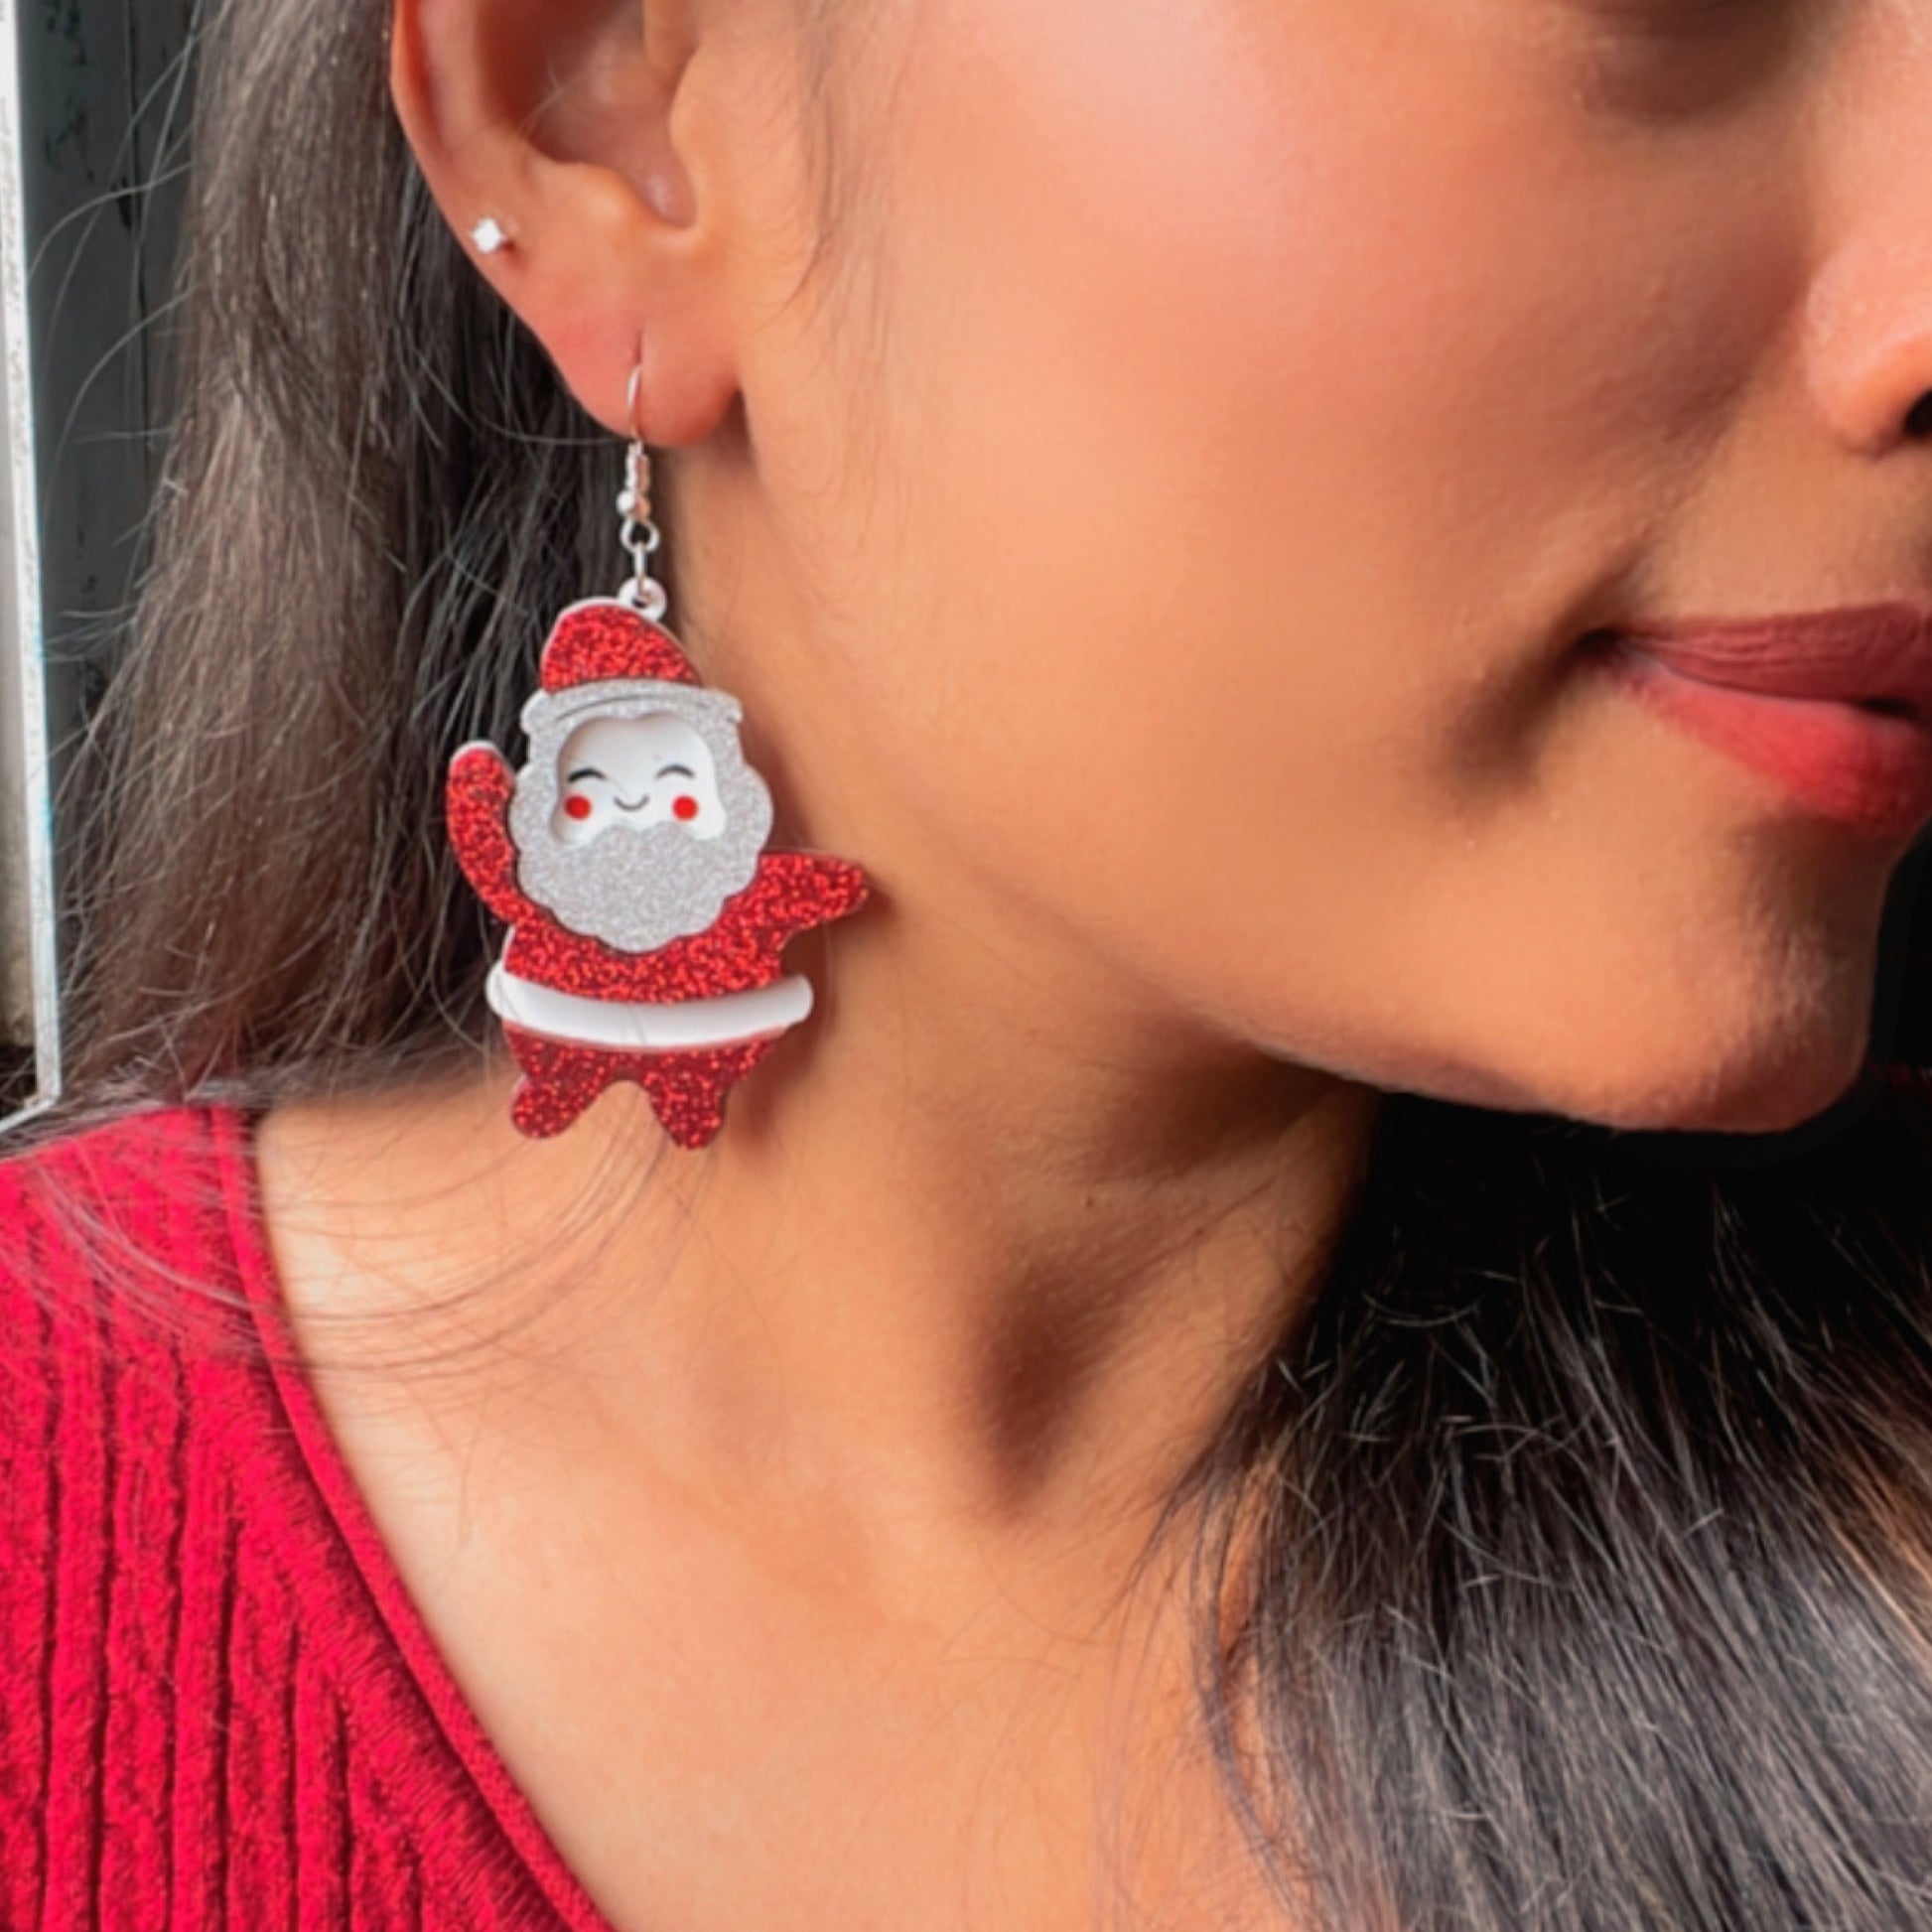 Dancing Santa Earrings - White and Shimmer Red- Nian by Nidhi - worn by a woman